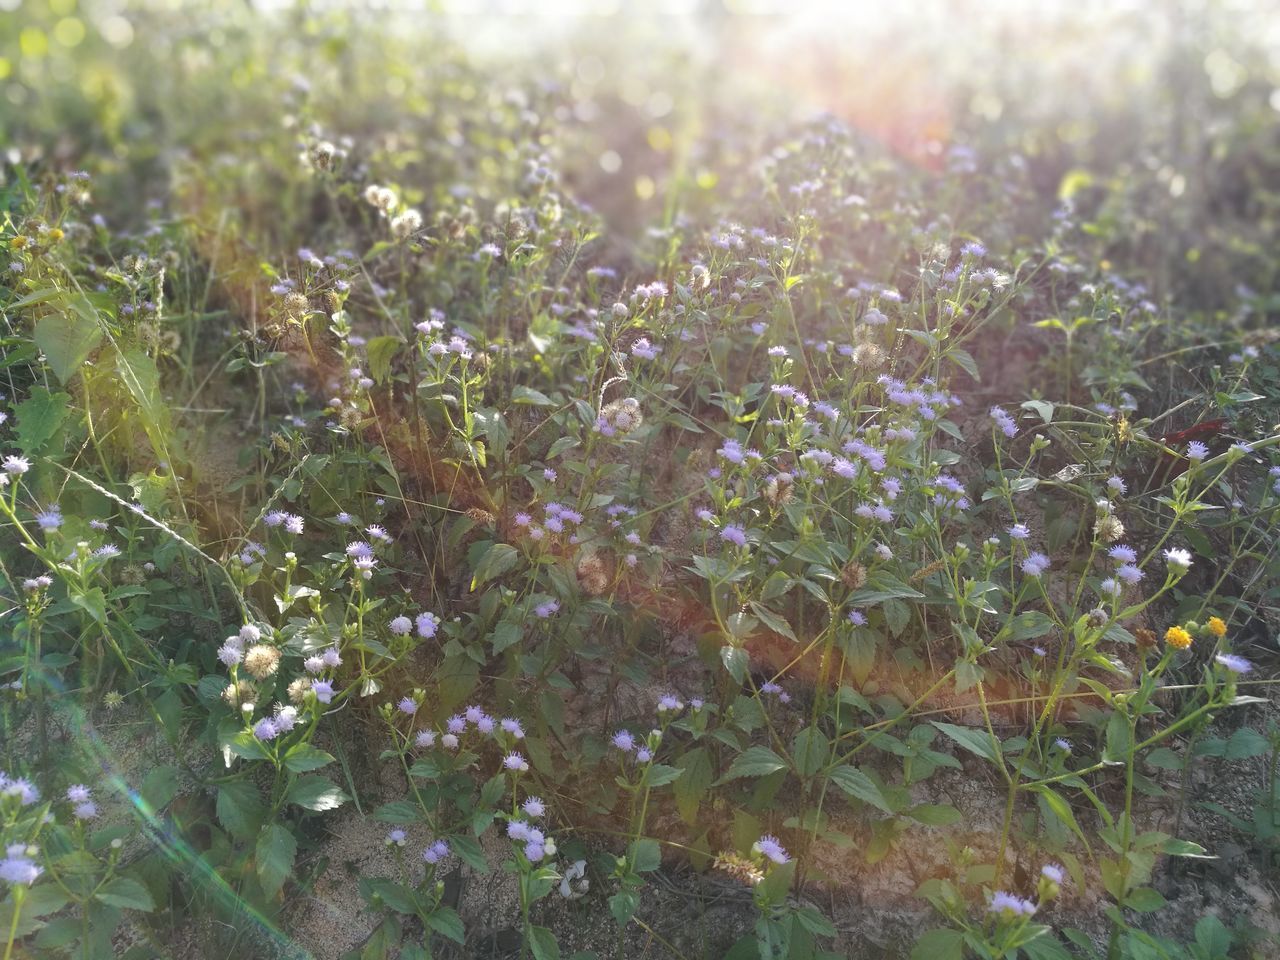 CLOSE-UP OF FLOWERING PLANTS GROWING ON FIELD